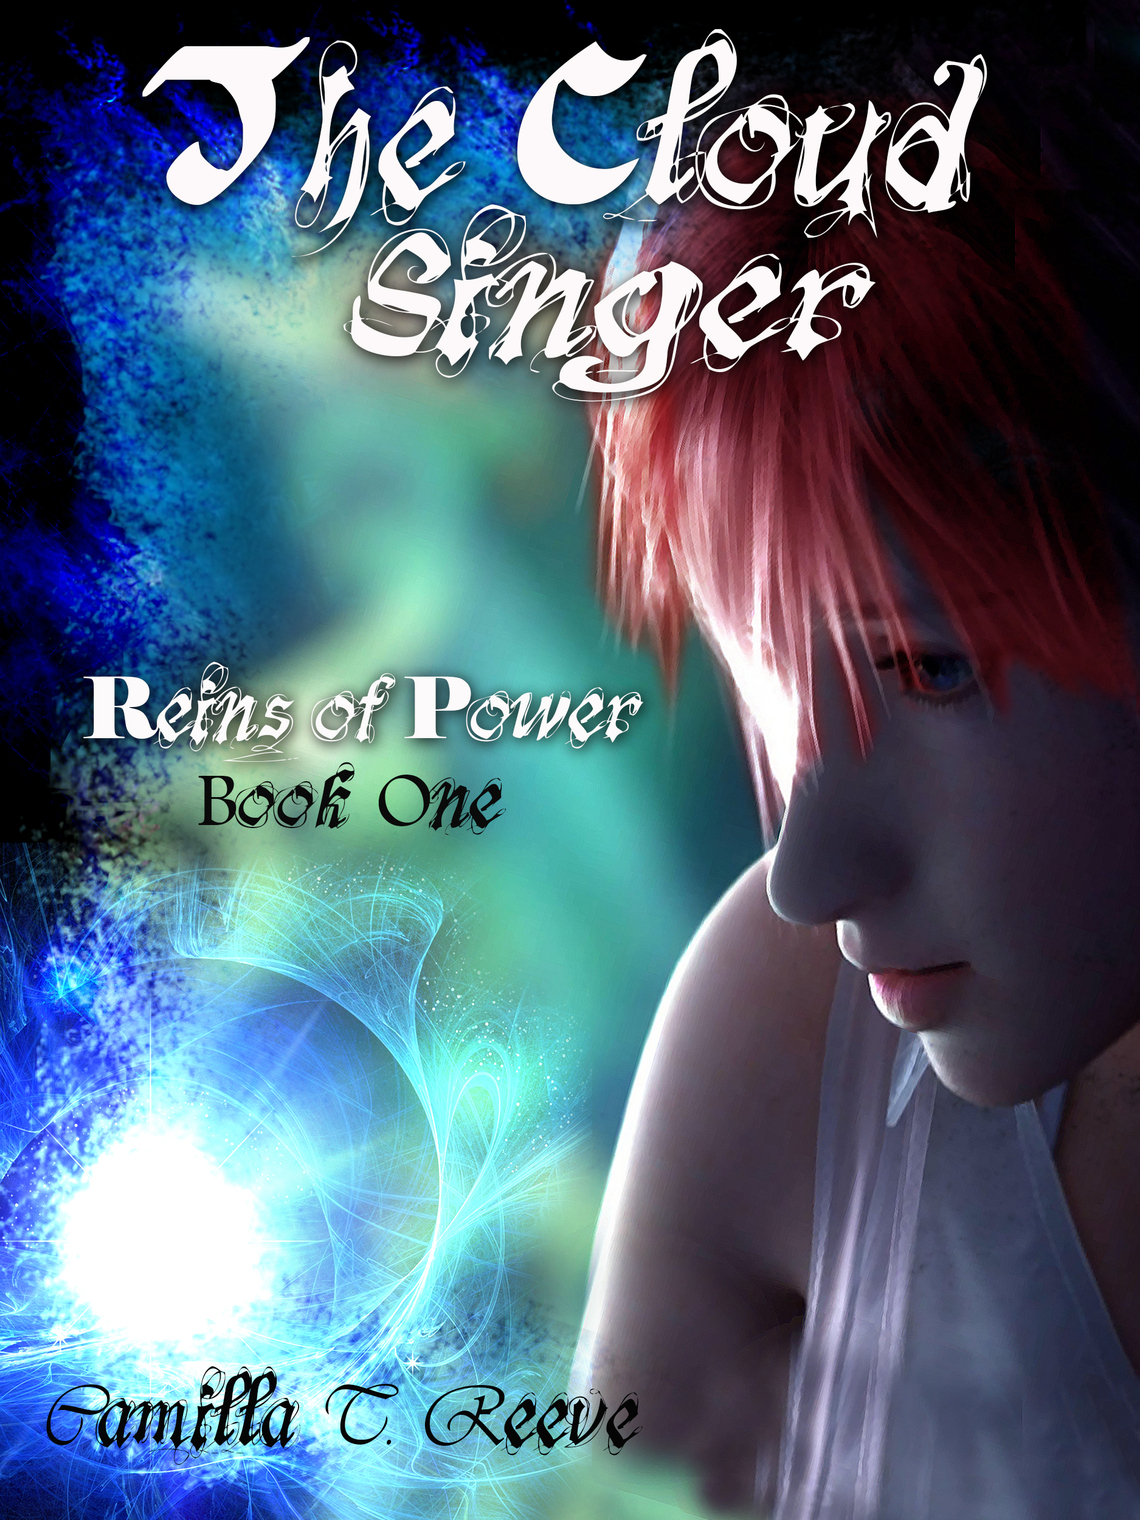 Front cover of The Cloud Singer